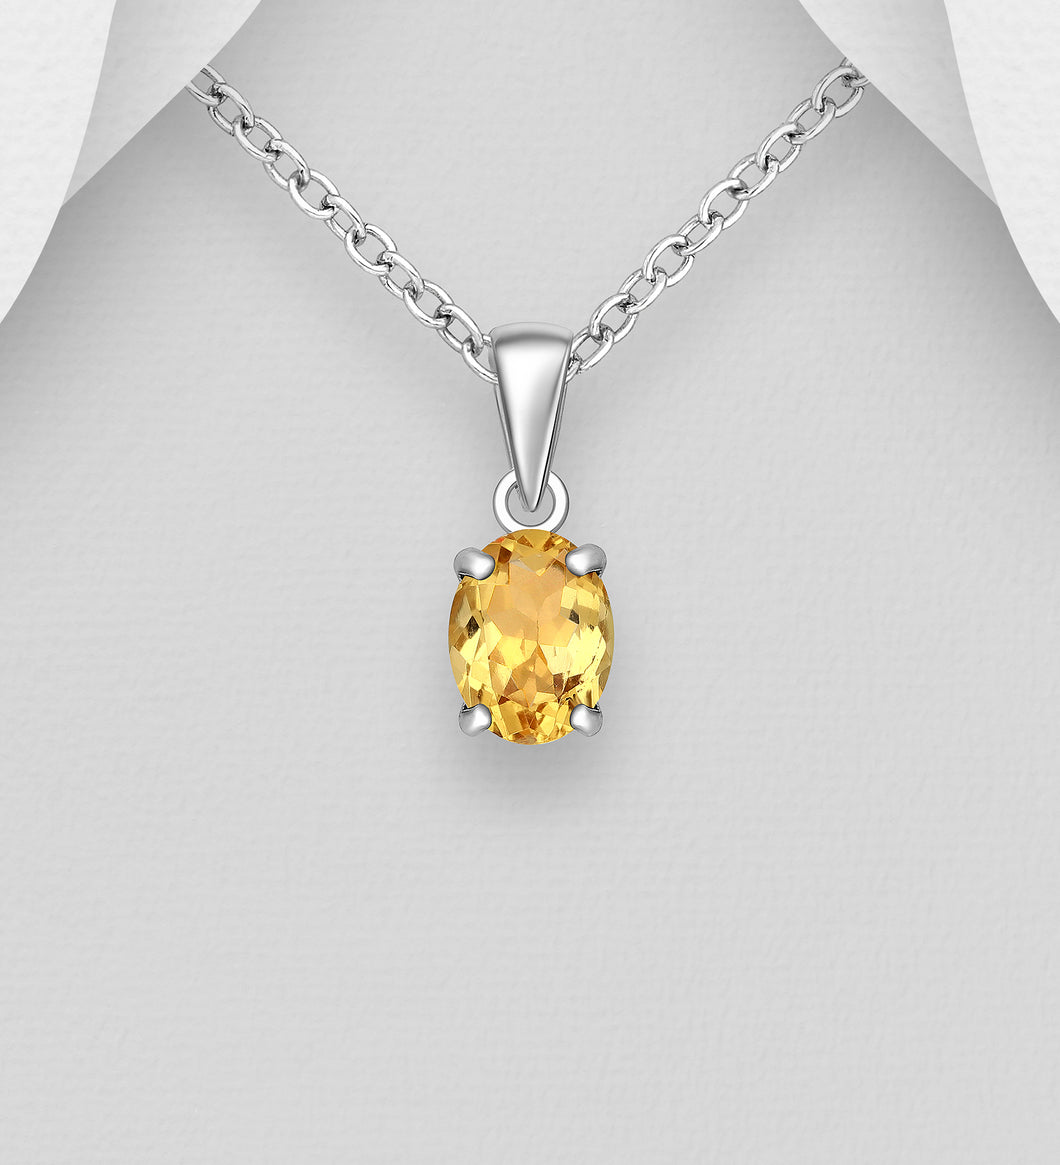 Silver Pendant Decorated with Natural Citrine Gemstones